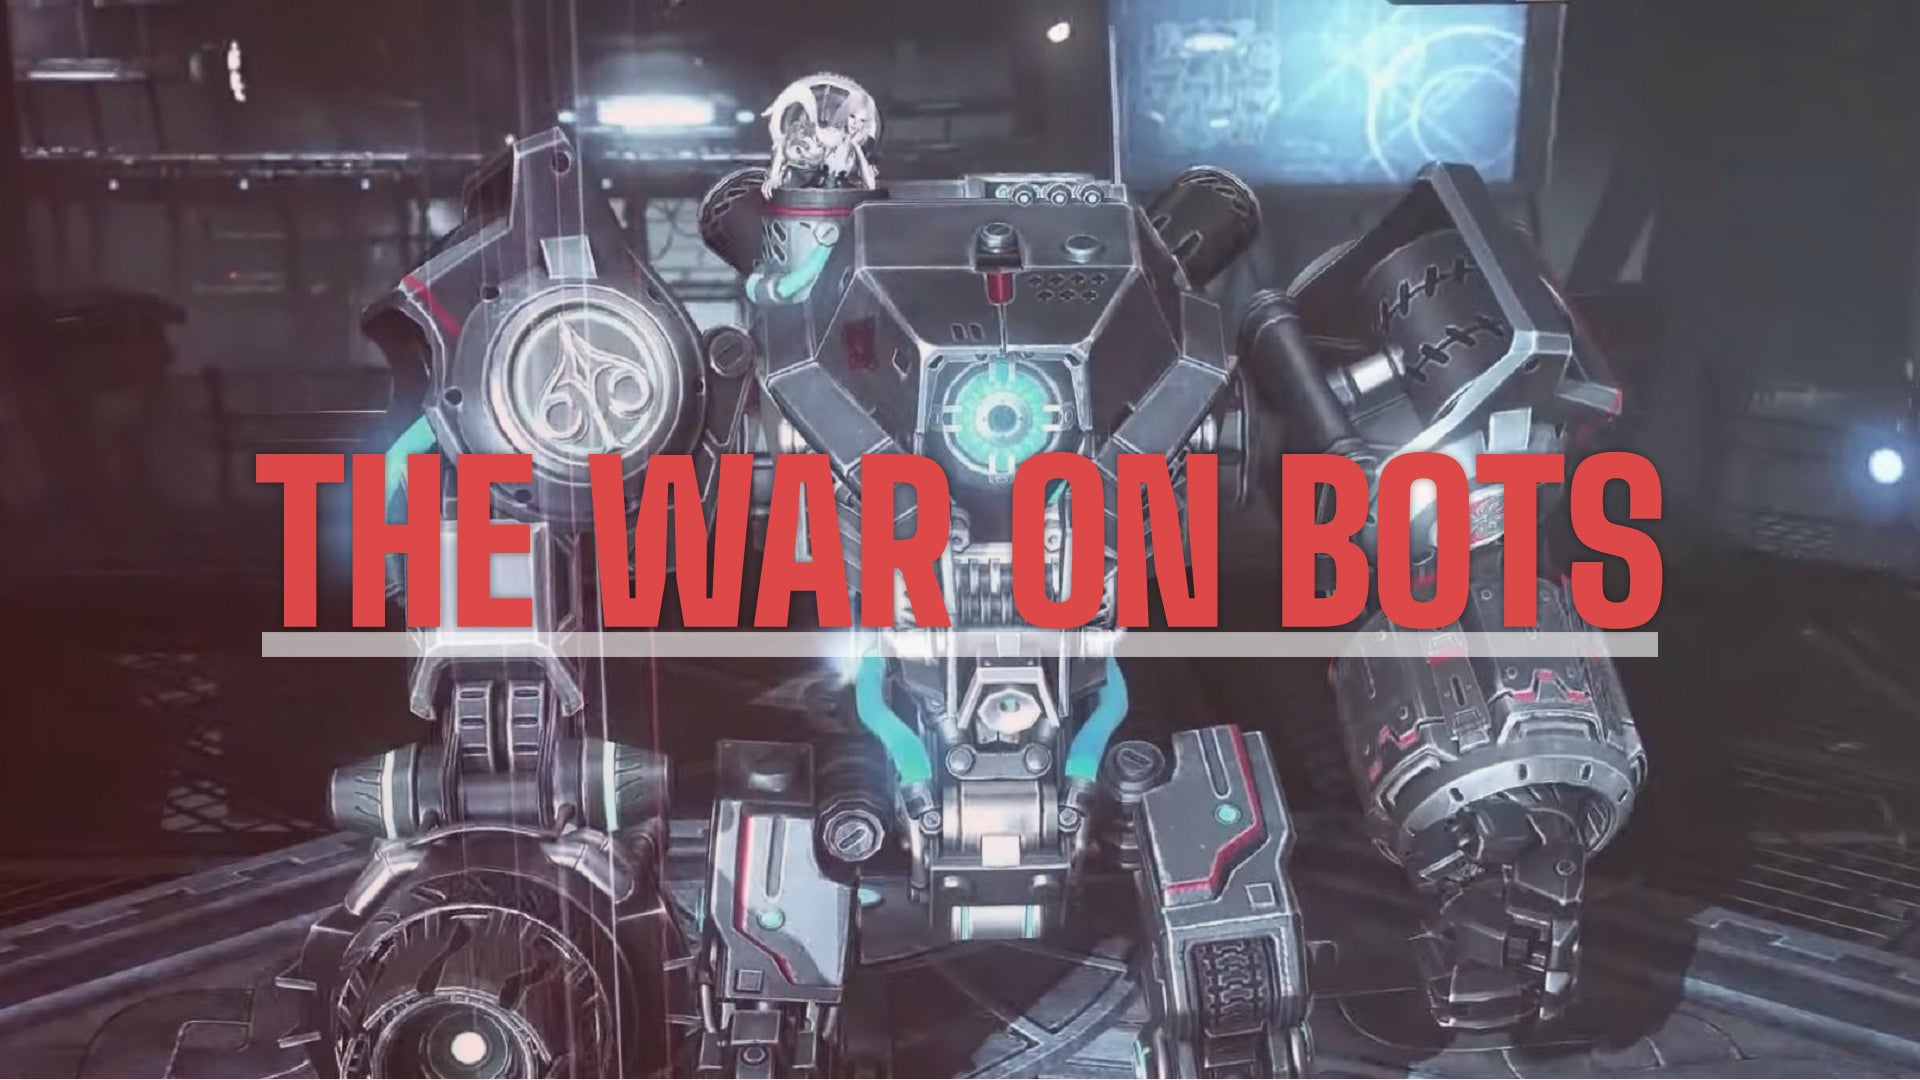 Lost Ark robot with headline text reading "The War on Bots"